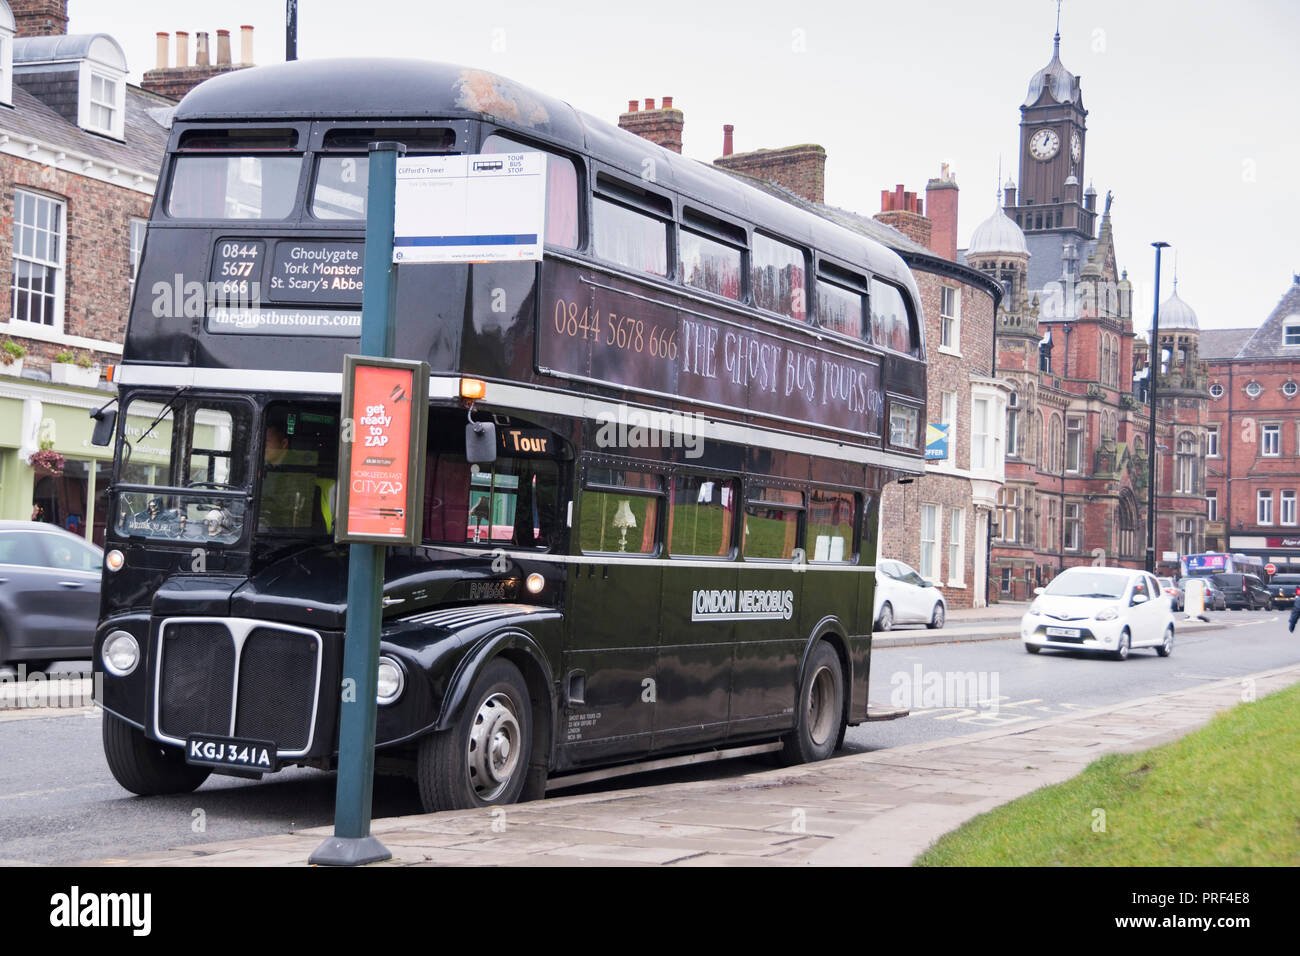 York, UK – 12 Dec 2016: The necrobus ghost bus tour bus waits at a bus stop on 12 Dec at Clifford Street, York Stock Photo